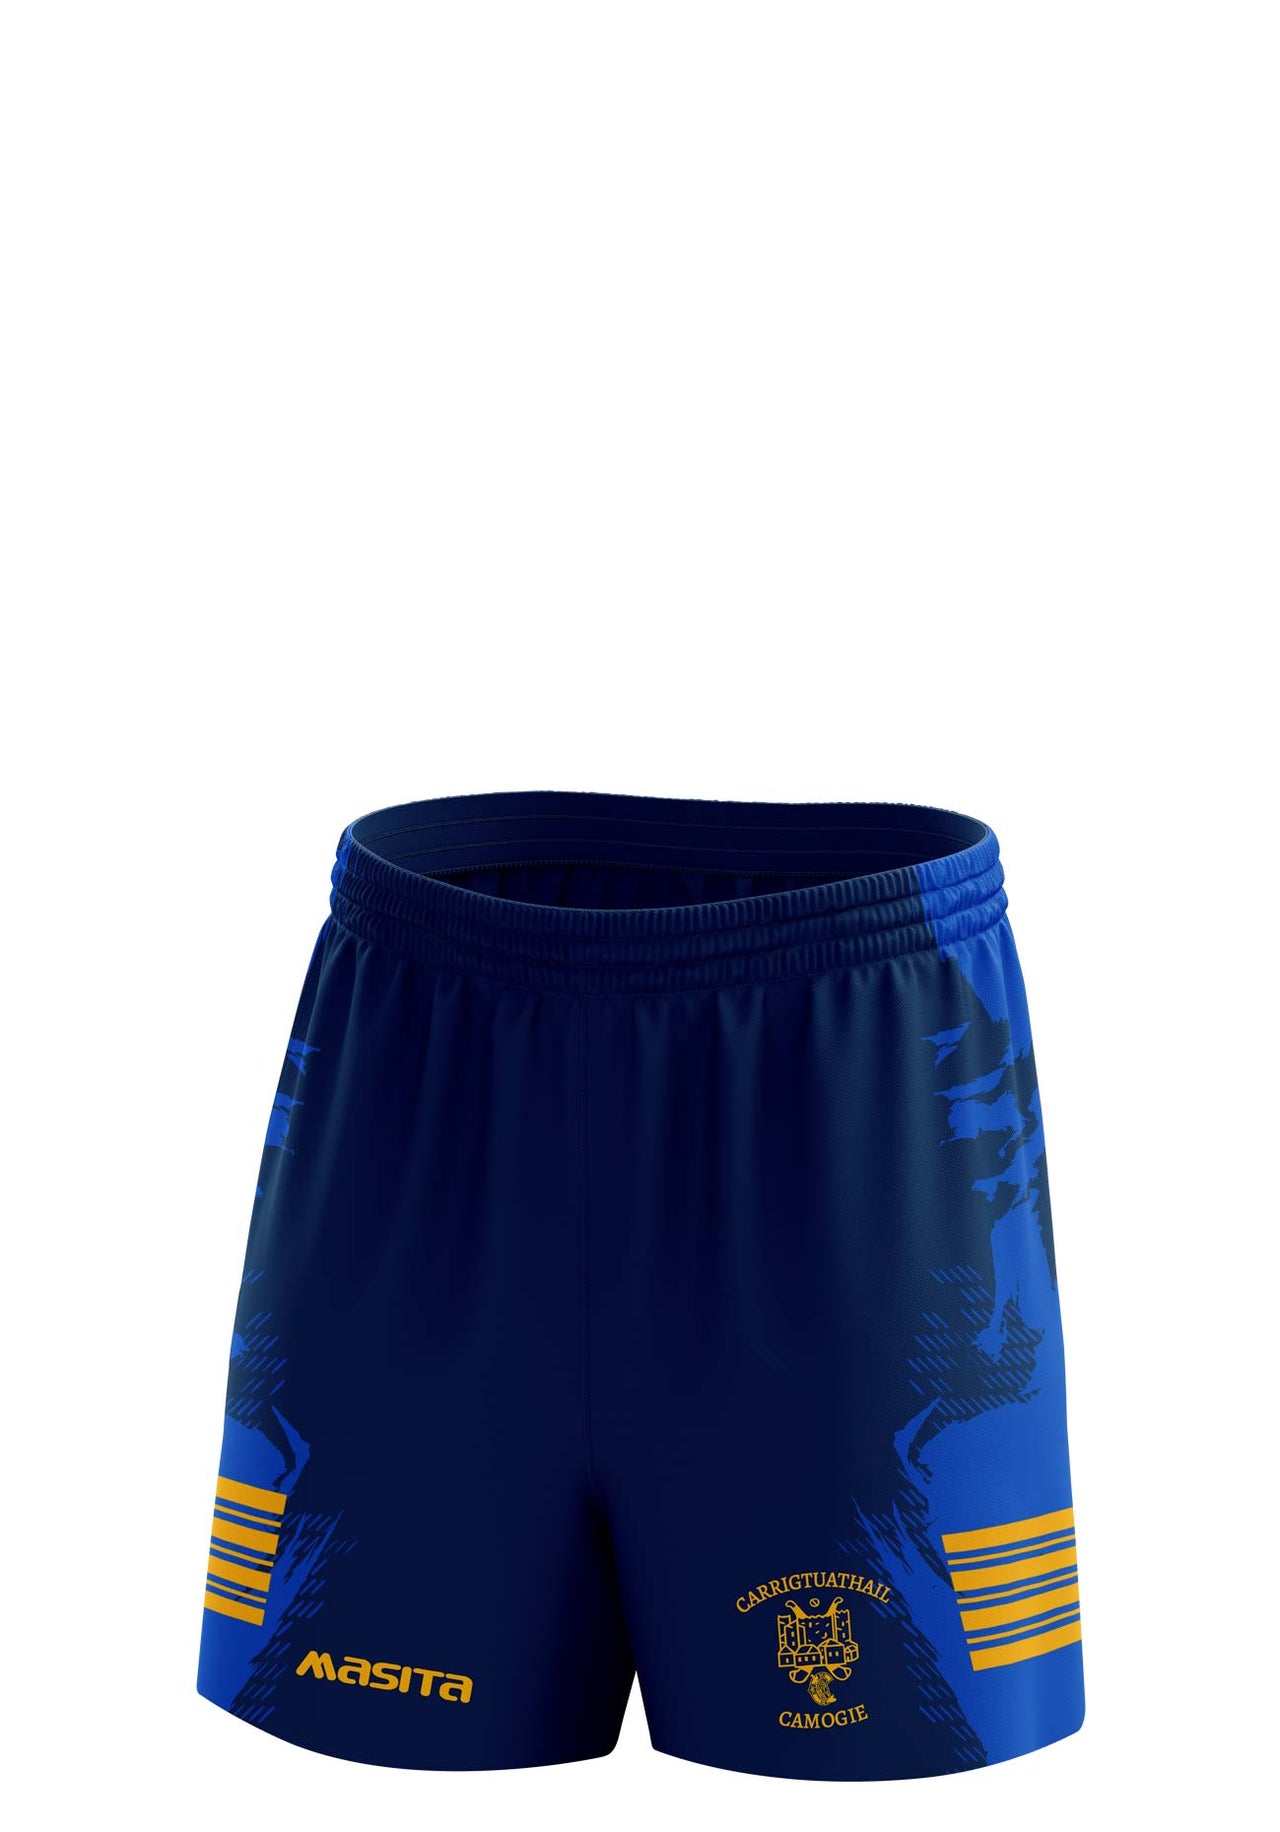 Carrigtwohill Camogie Training Shorts Adult